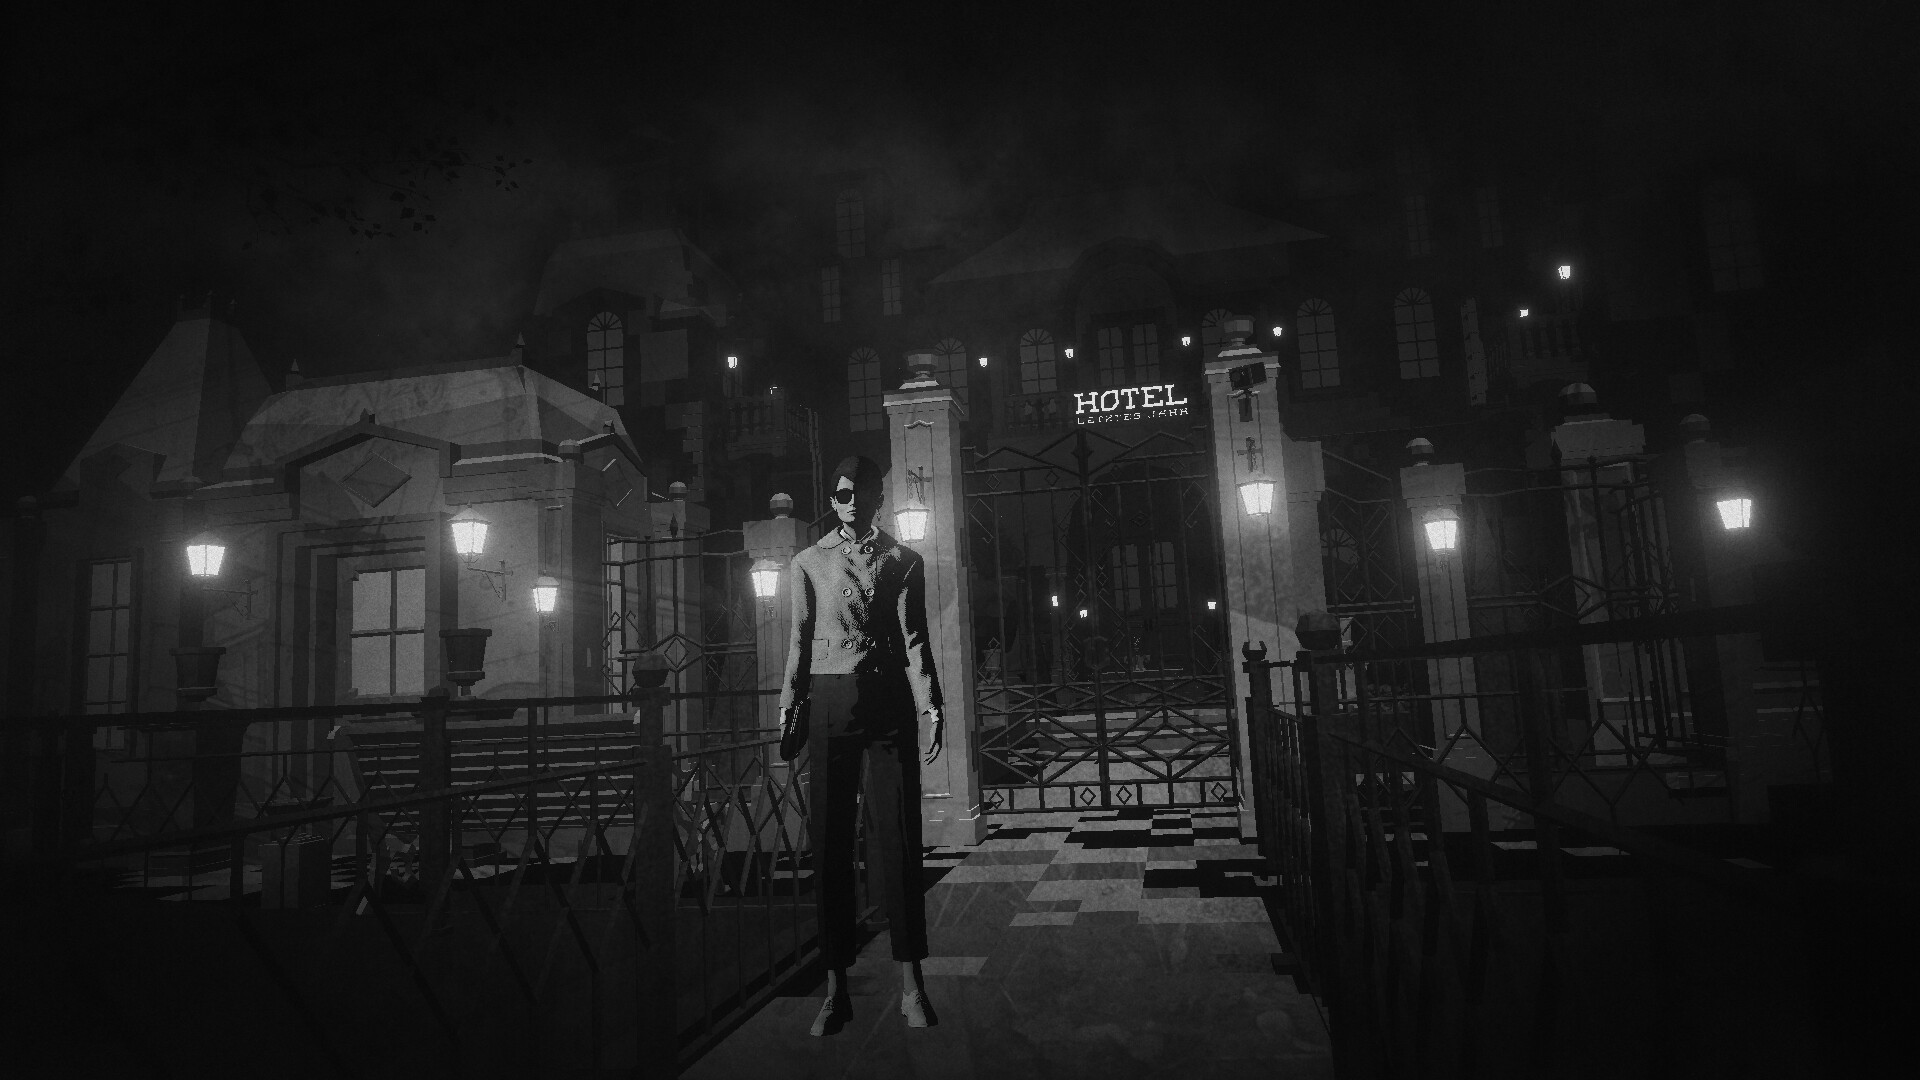 A woman stands before the gates of a hotel